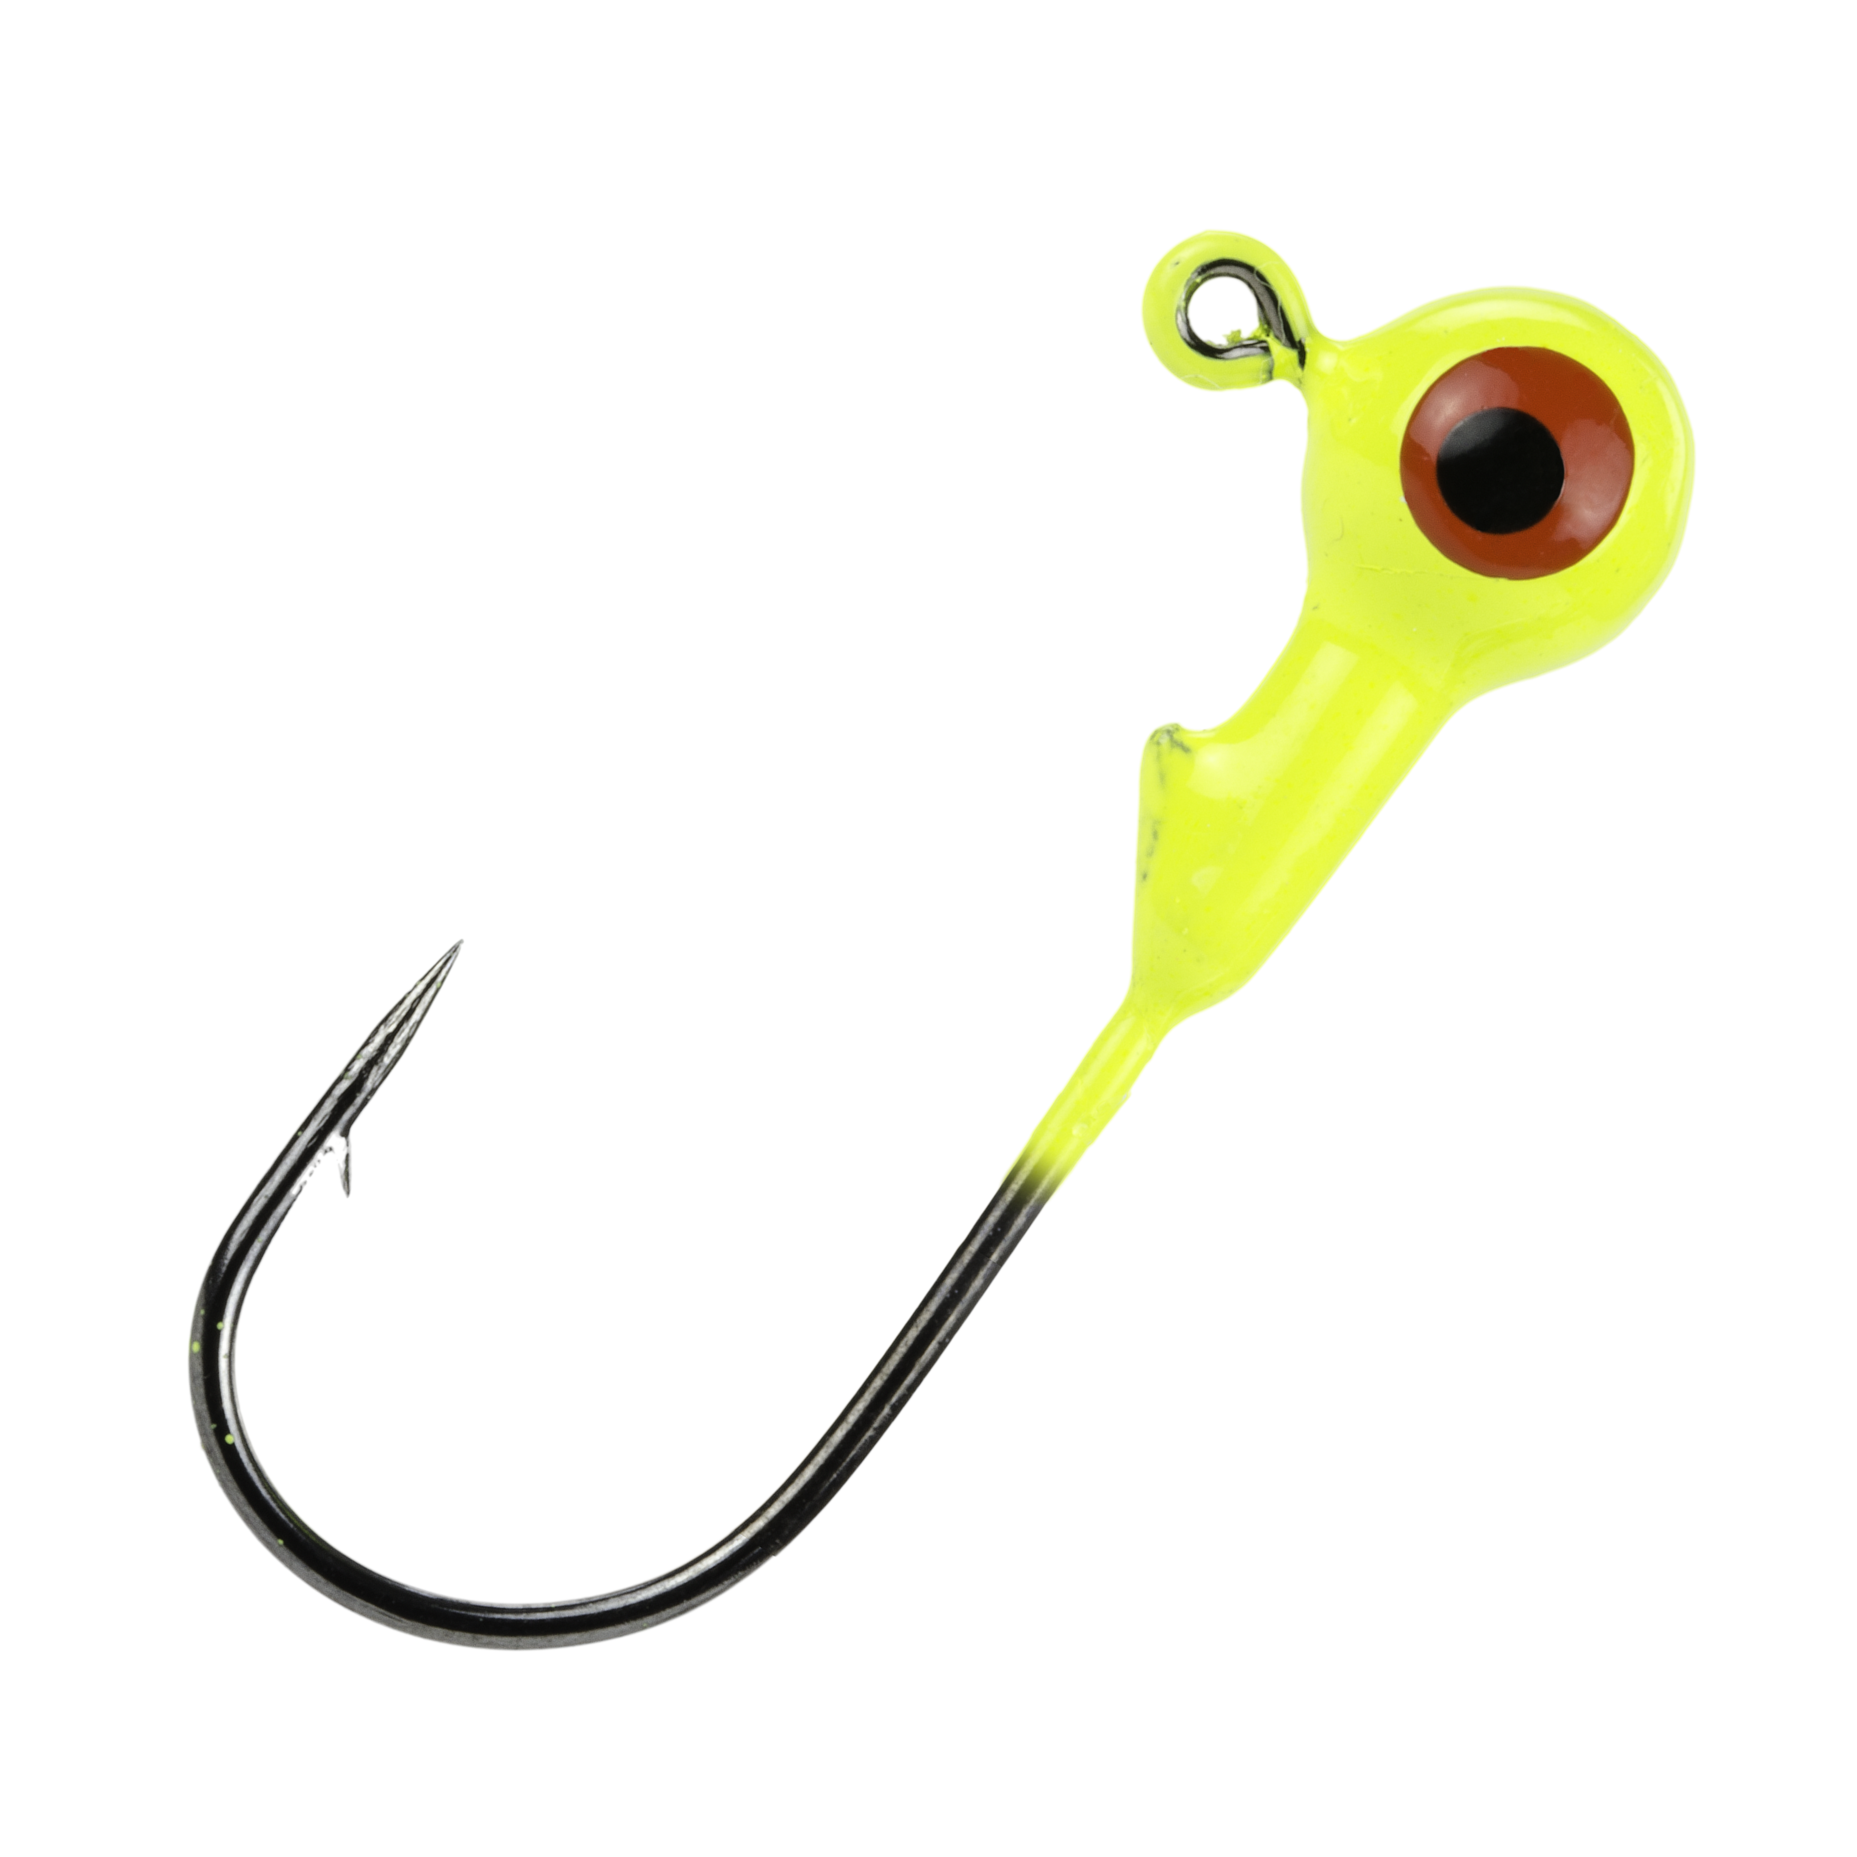 Strike King Mr. Crappie Scizzor Shad Body - 2.25 Long - Pack of 10